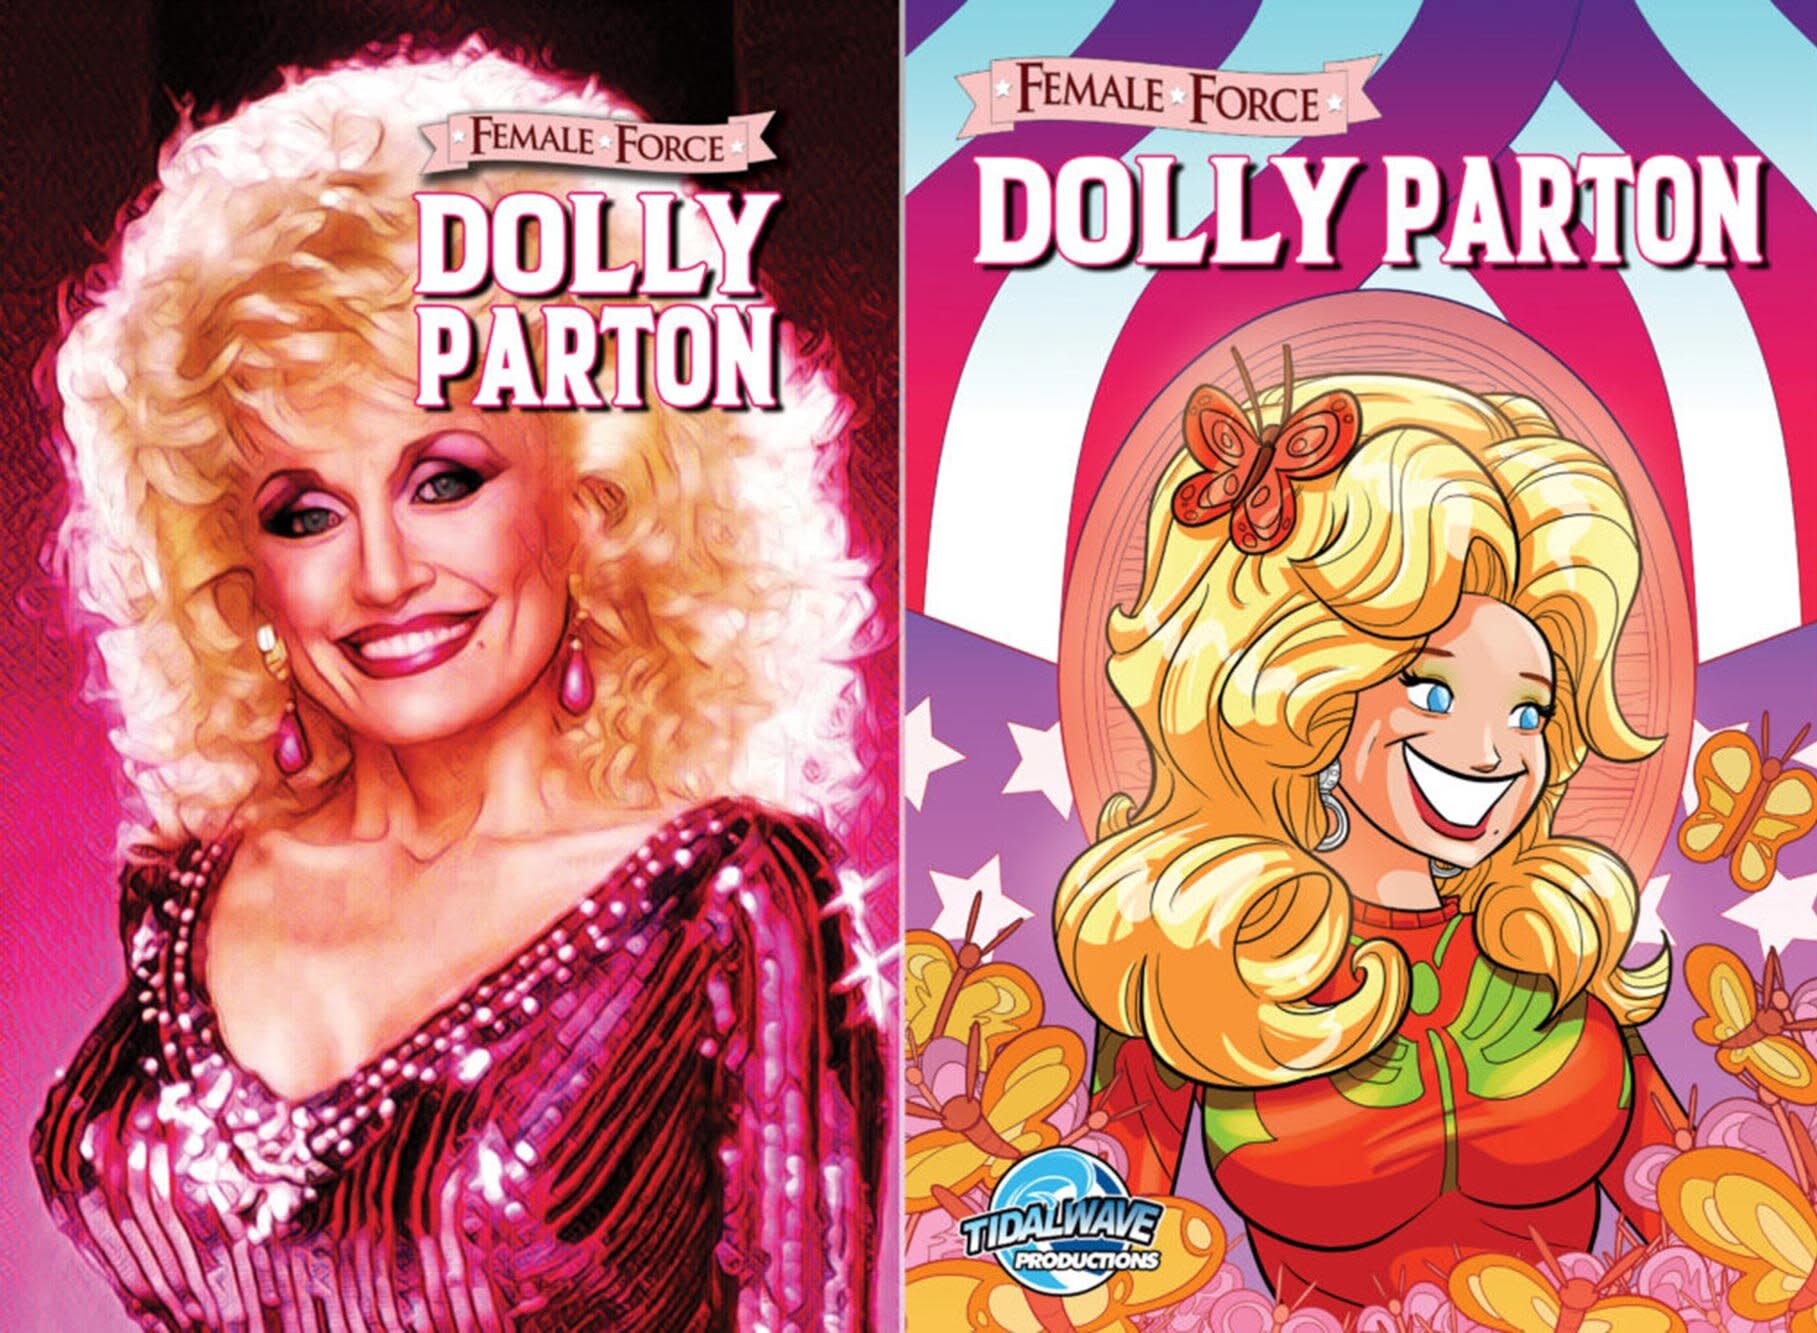 Dolly Parton Celebrity Caricatures Funny Caricatures Caricature Hot Sex Picture 